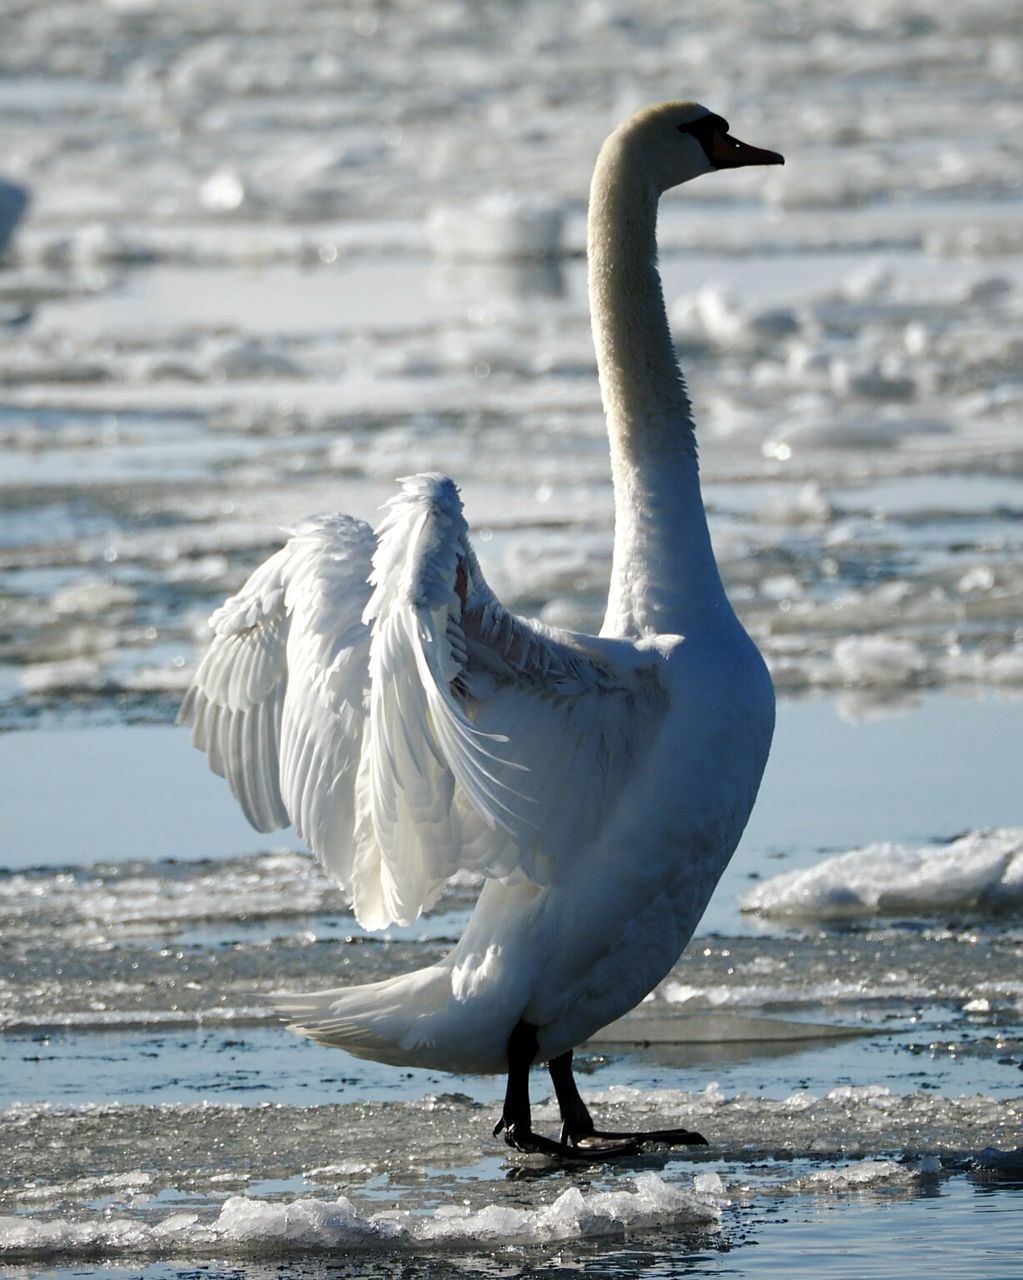 CLOSE-UP OF SWAN BY LAKE